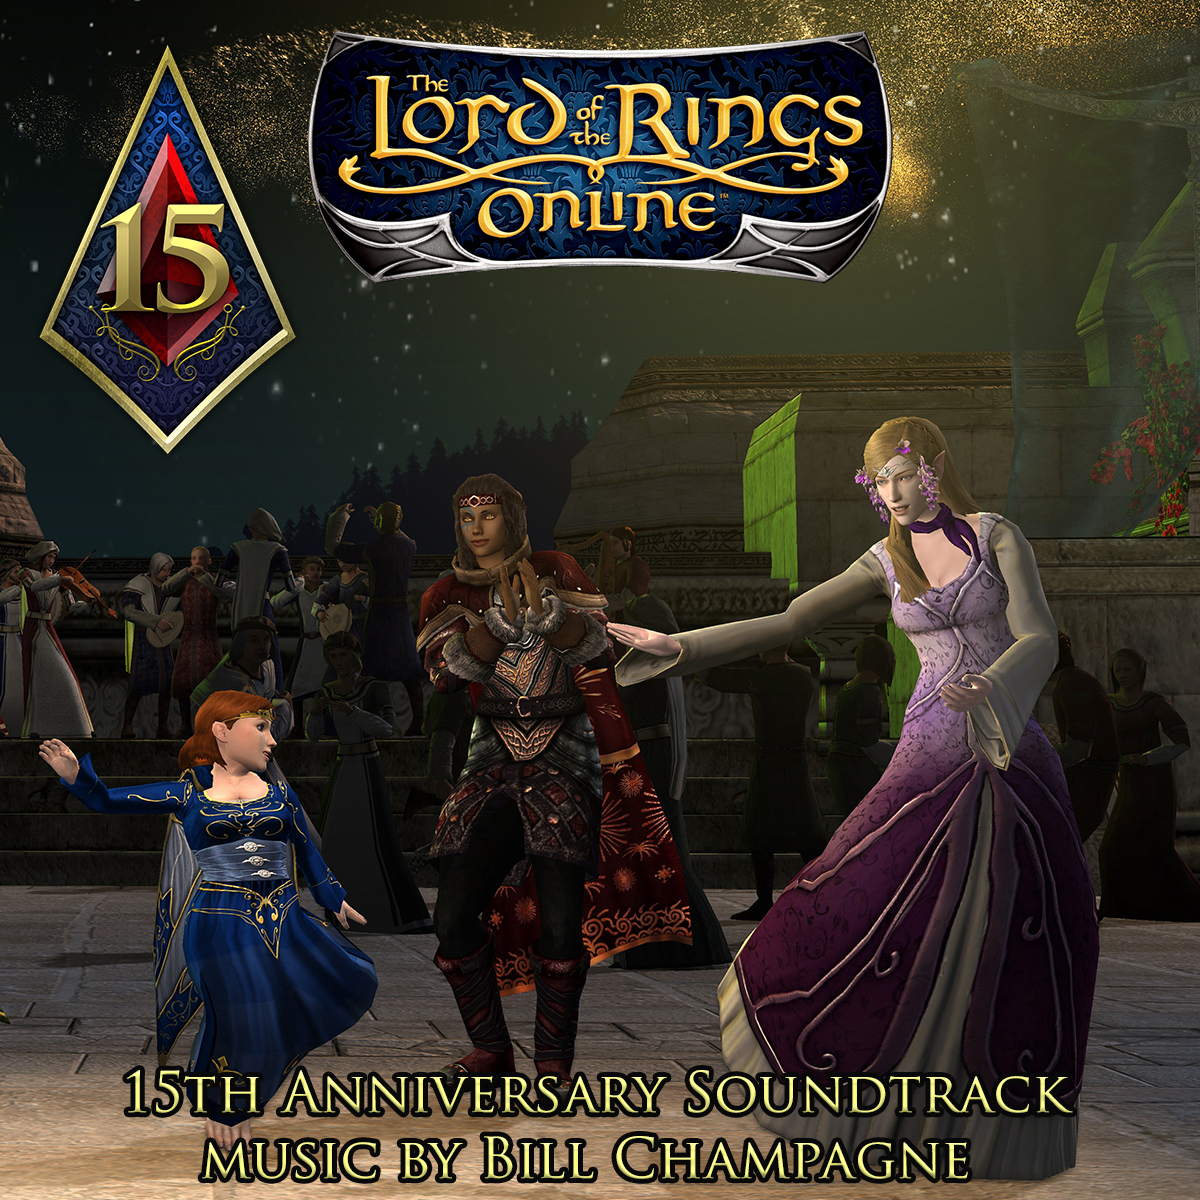 Give Vandt Paradis Listen to our 15th Anniversary Soundtrack Here! | The Lord of the Rings  Online